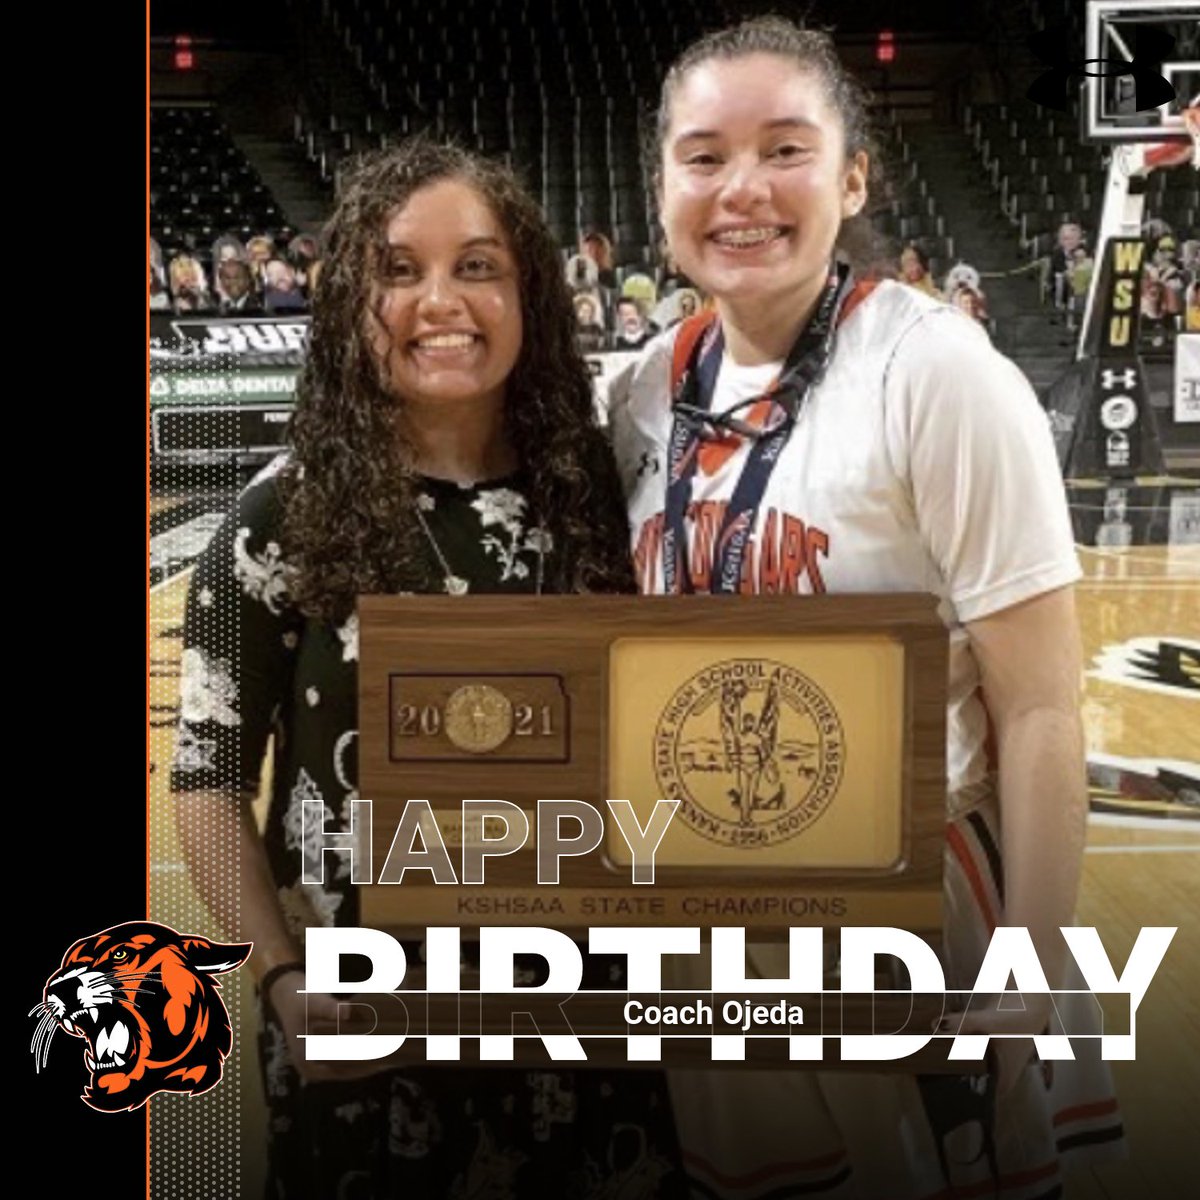 Happy Birthday to our Assistant Coach, Elissa Ojeda! Thanks for all you do for our program. We hope it is a great day!!